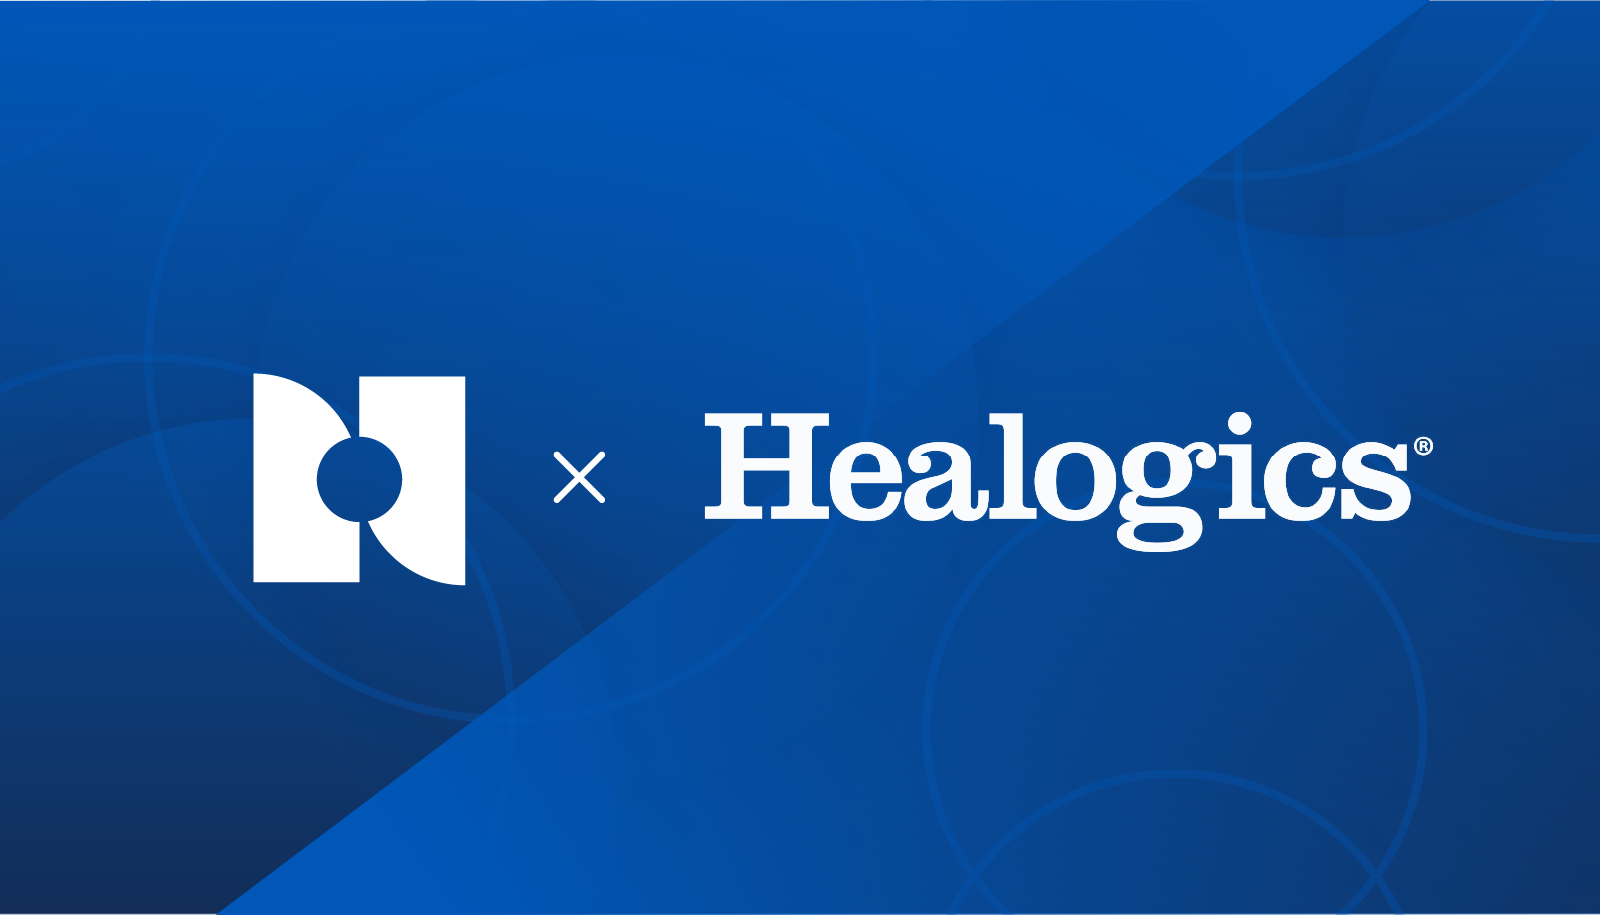 Net Health Partners with Healogics to Deliver Innovative Tissue Analytics Solution for Wound Care